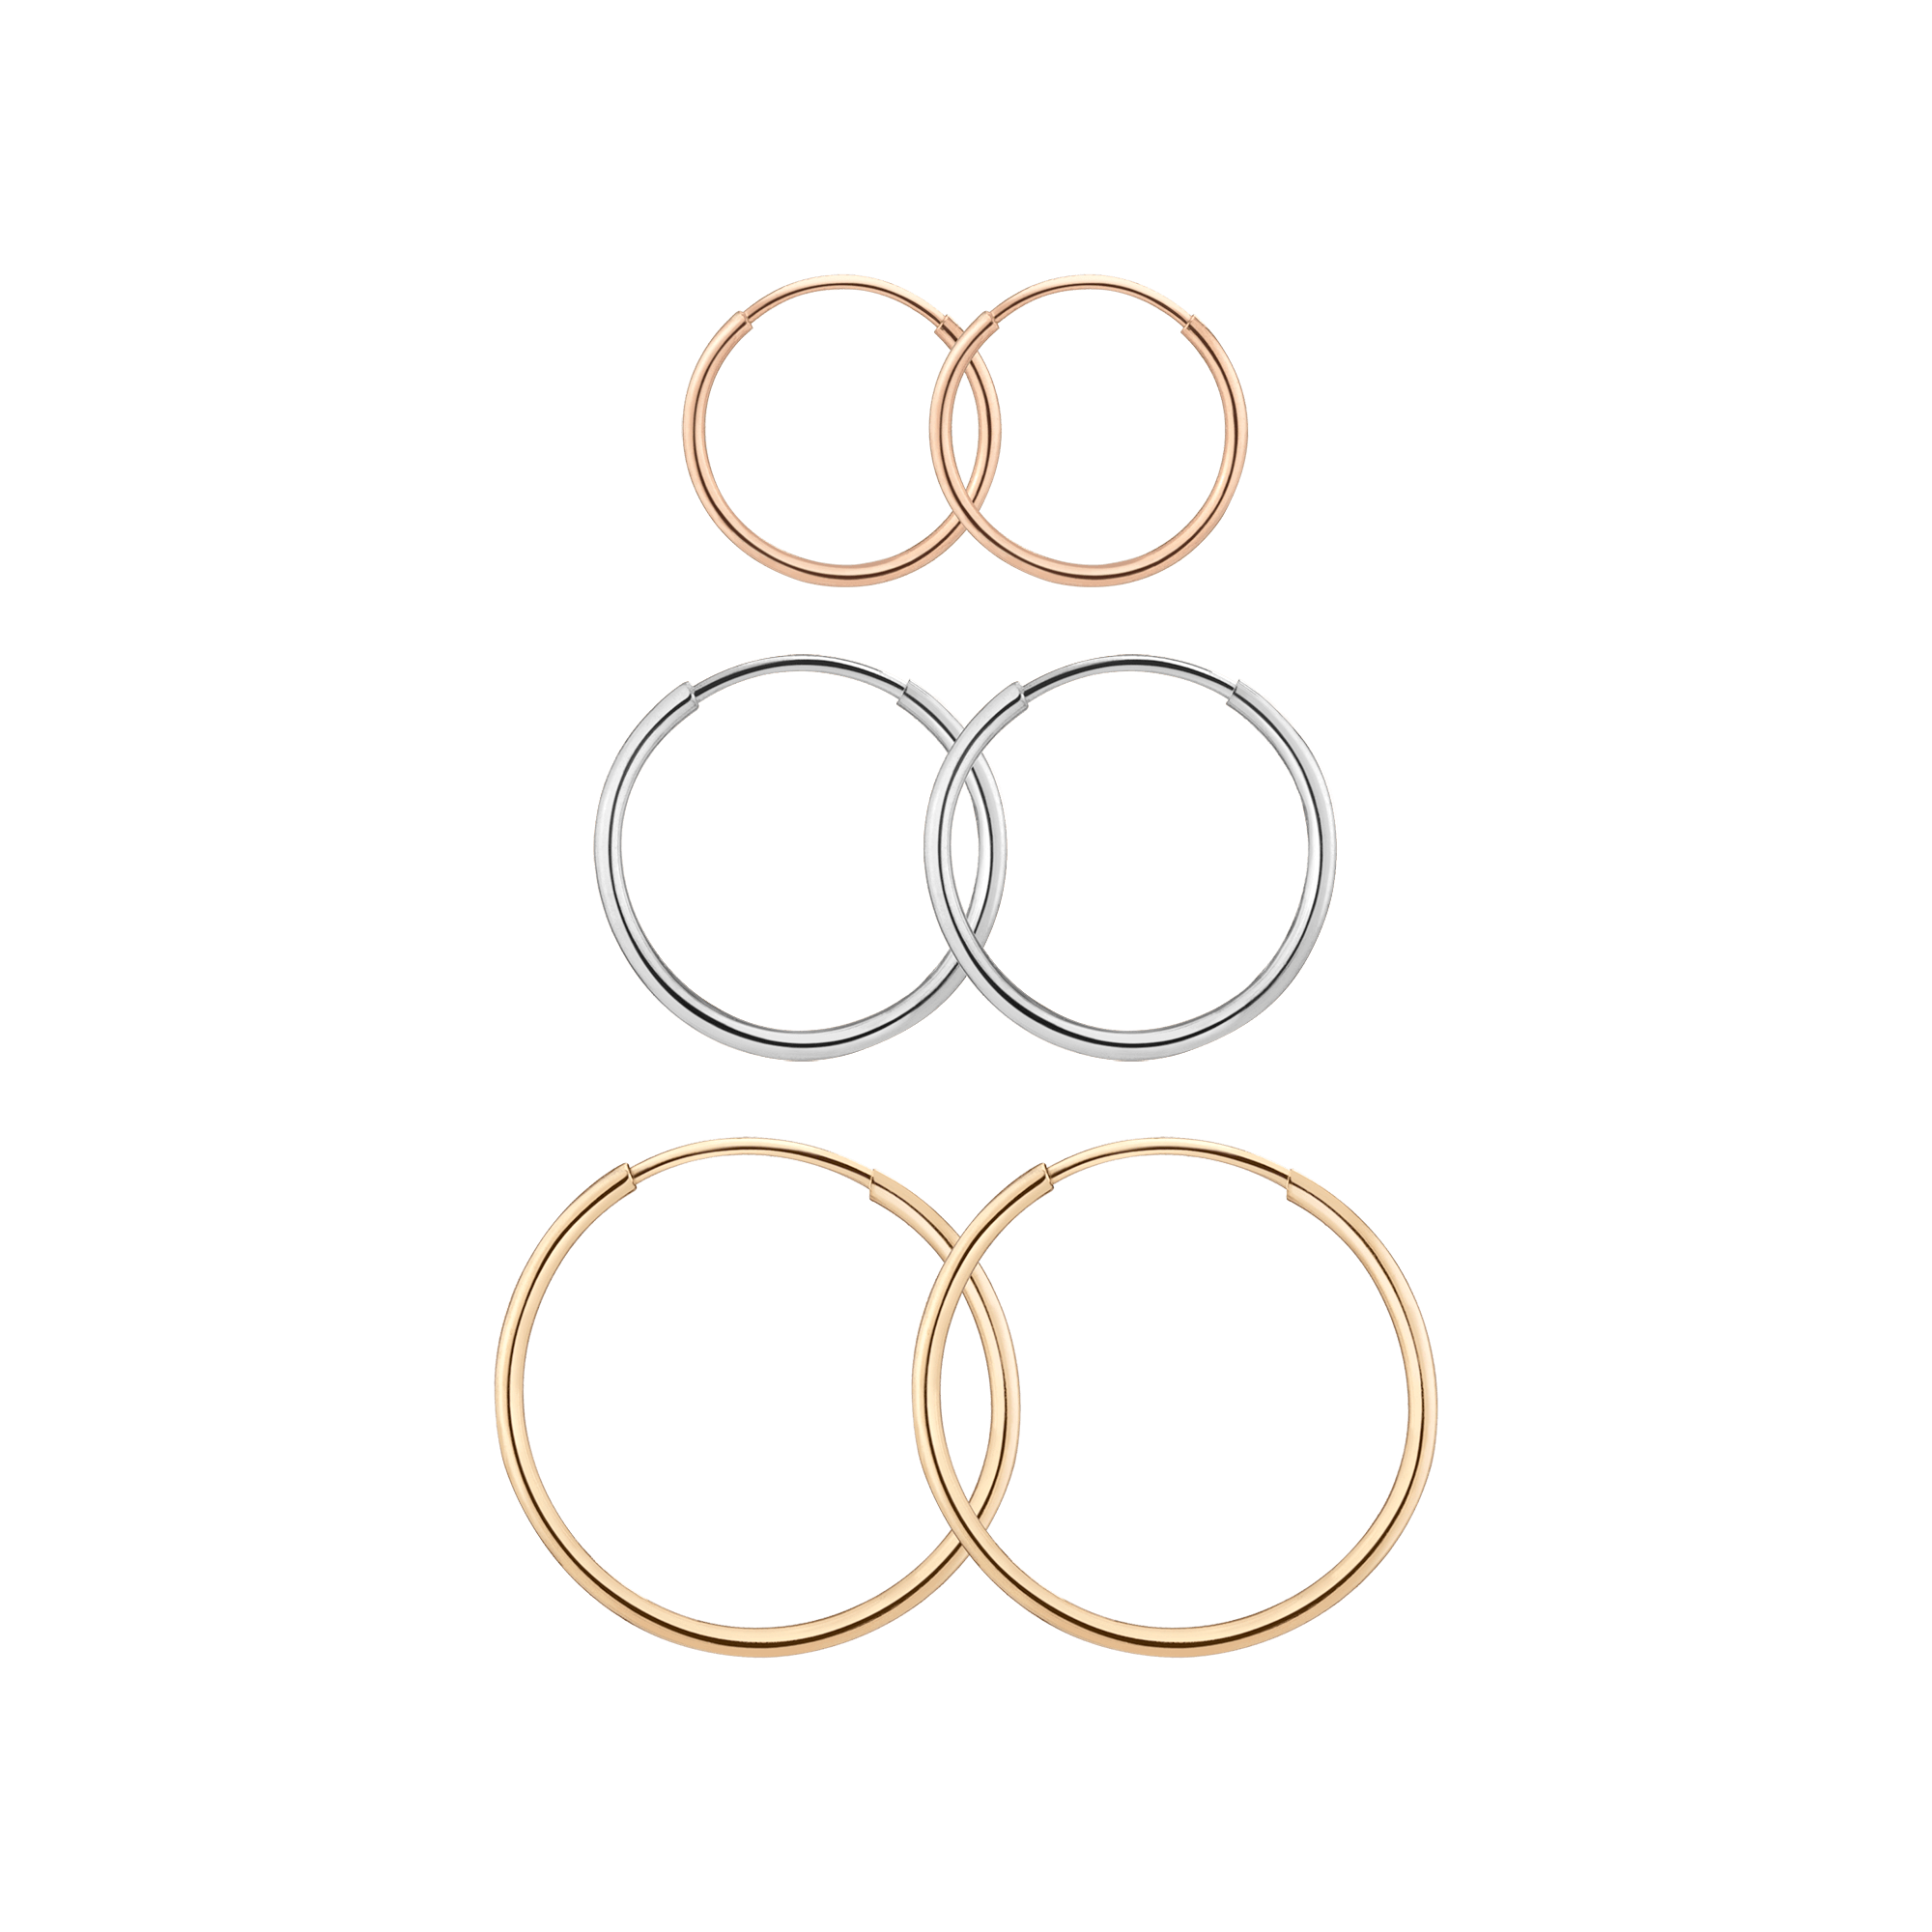 Lightweight Gold Hoop Earrings Trio in Yellow, Rose or White Gold